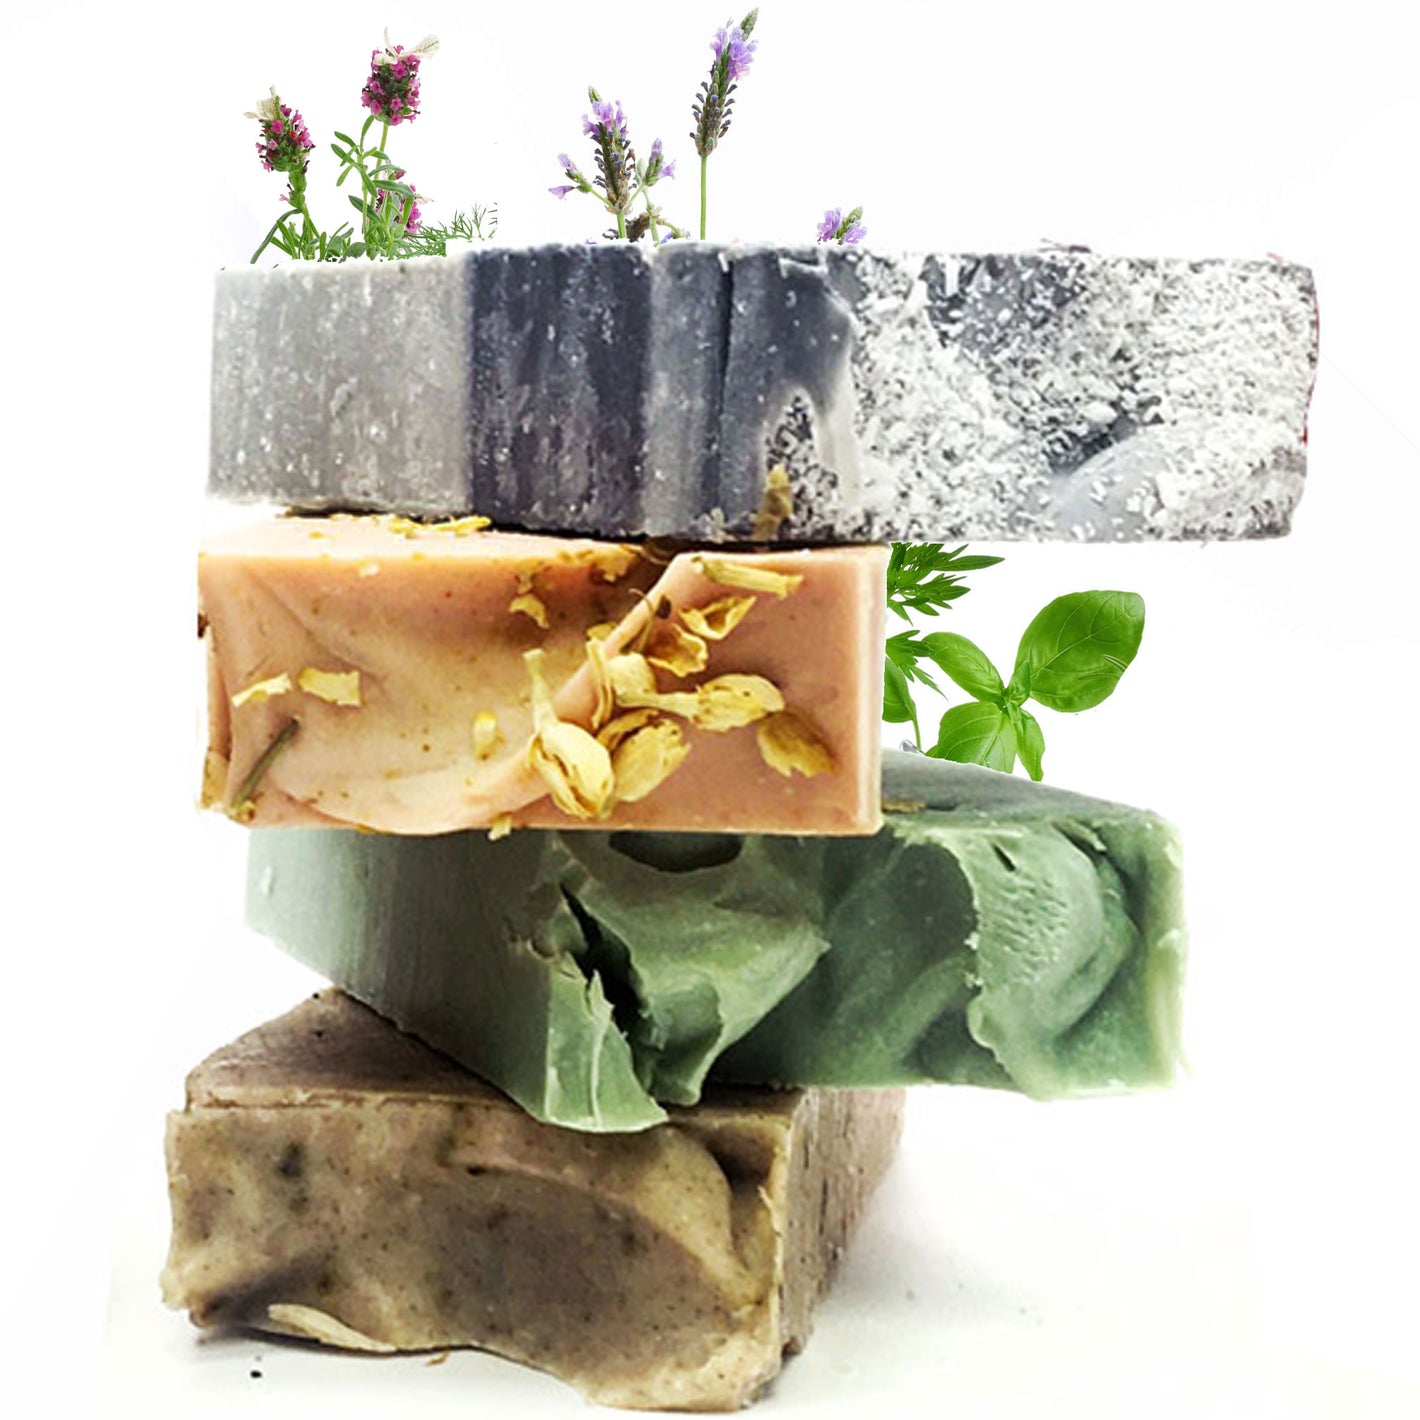 Experience the Purity of Nature: Pamper Purify, Exfoliate and Soothe Your Face, Hair and Body with Our Clay Beauty Soaps, Perfect for All Skin Types, Even Sensitive and Pet friendly - Shop Now for Luxurious Self-Care